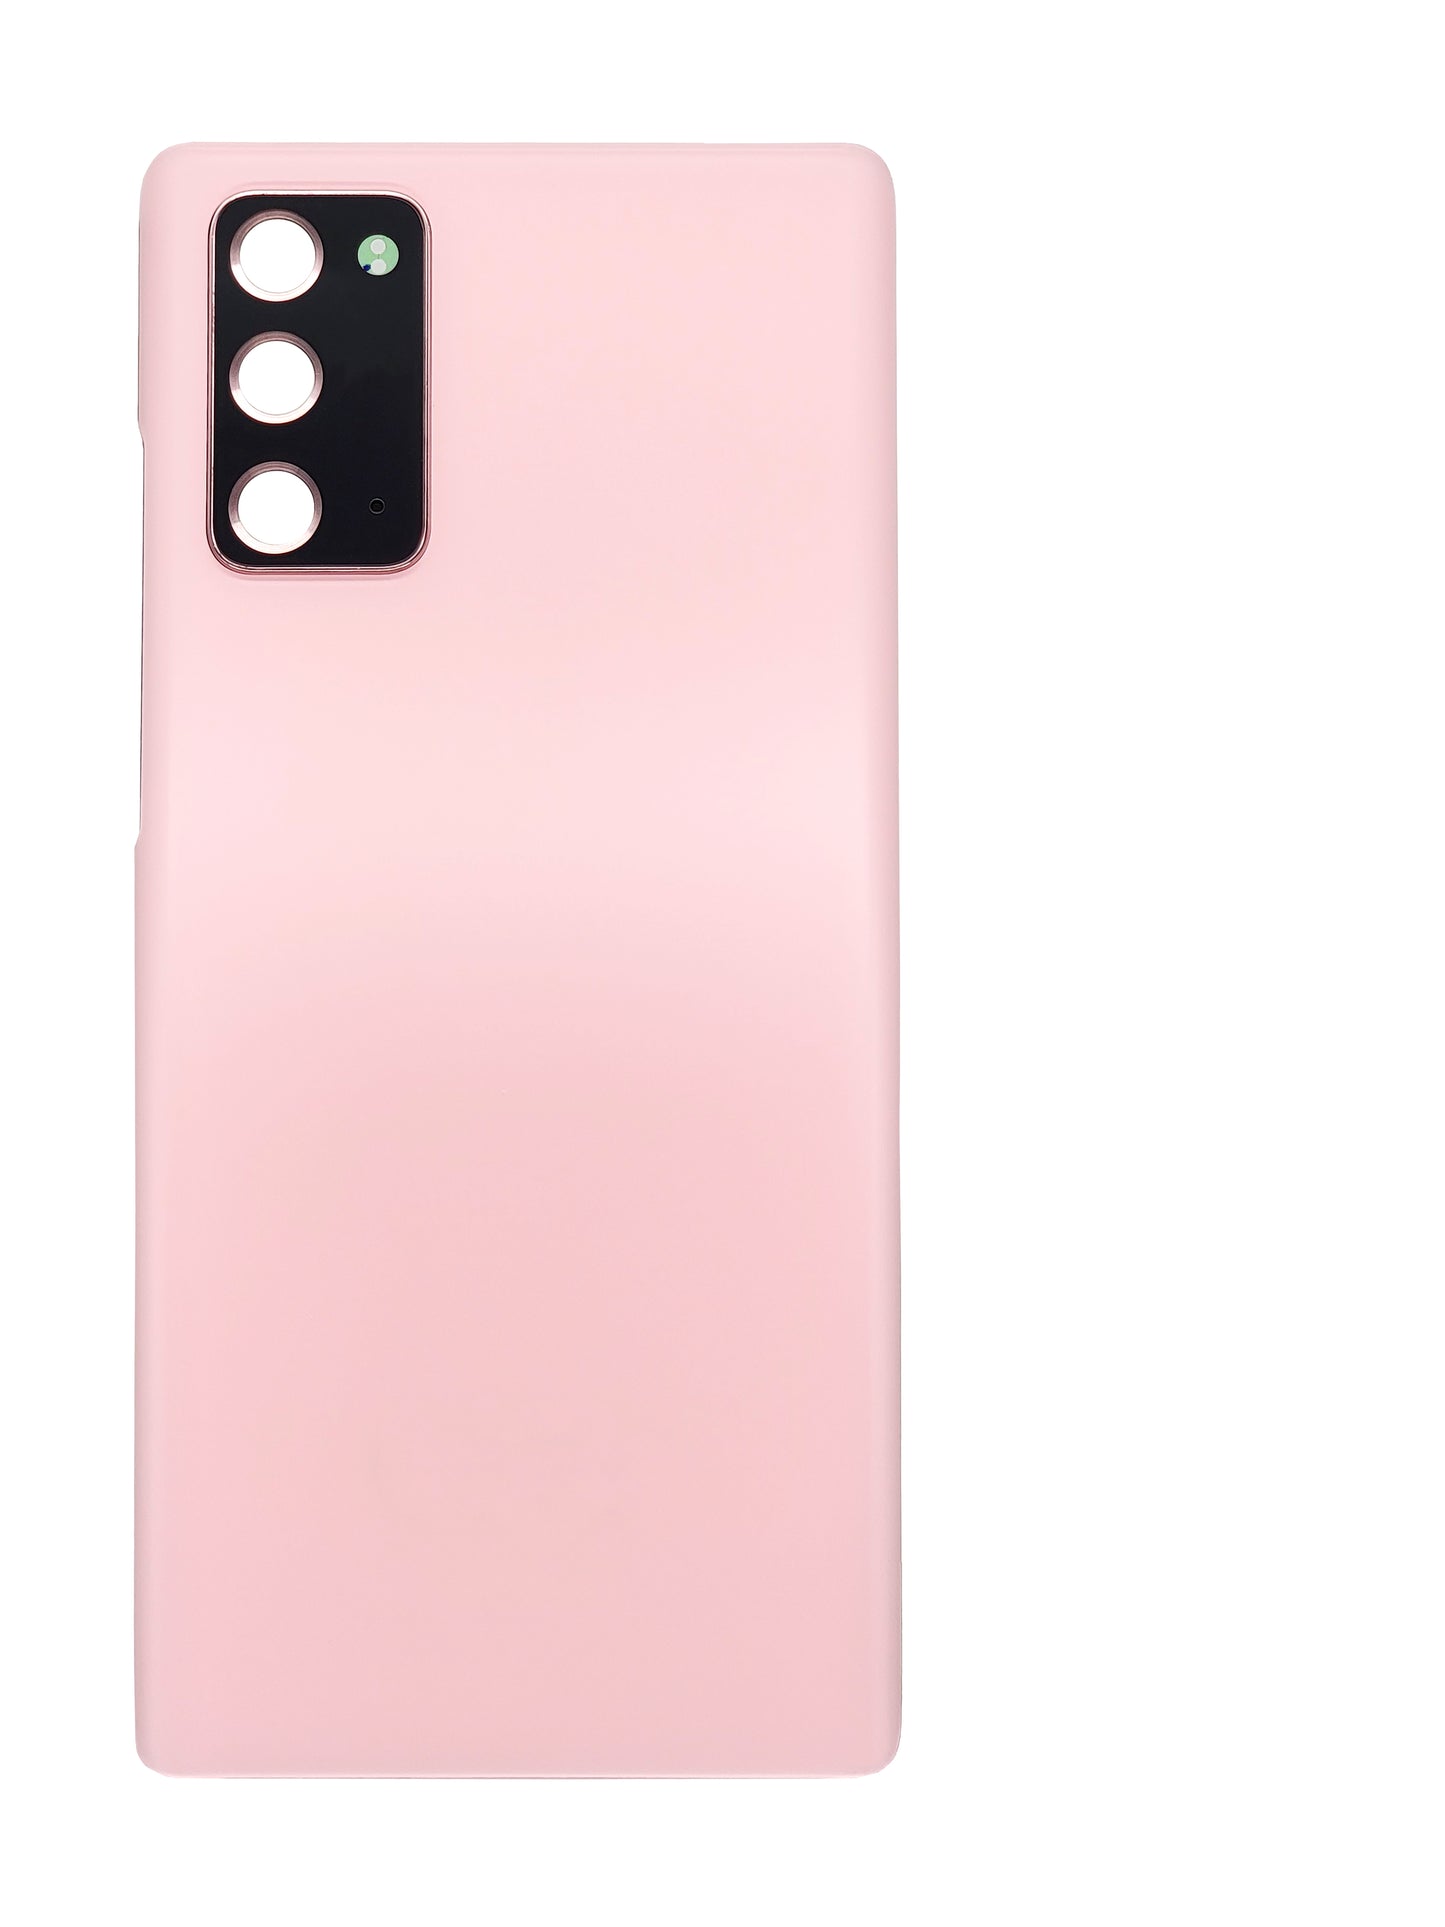 SGN Note 20 Back Cover (Pink)